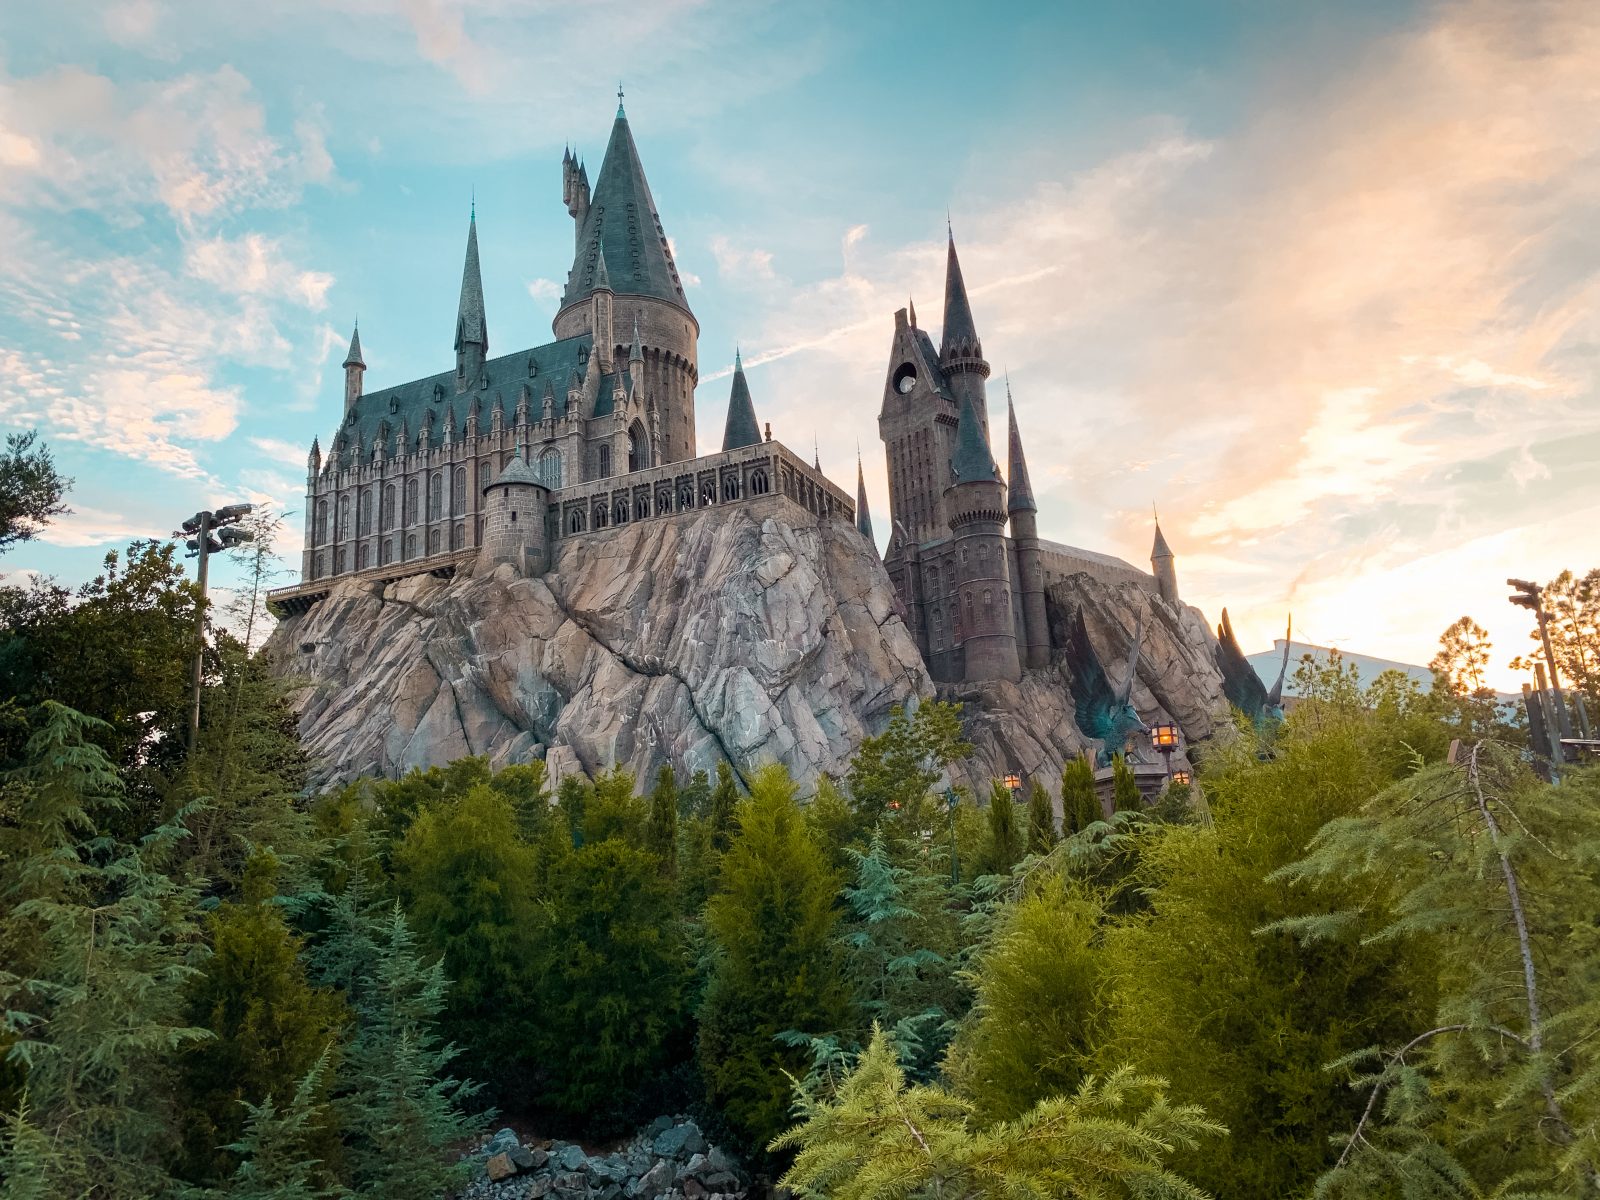 Hogwarts at sunset at the Wizarding World of Harry Potter in Universal Studios Orlando